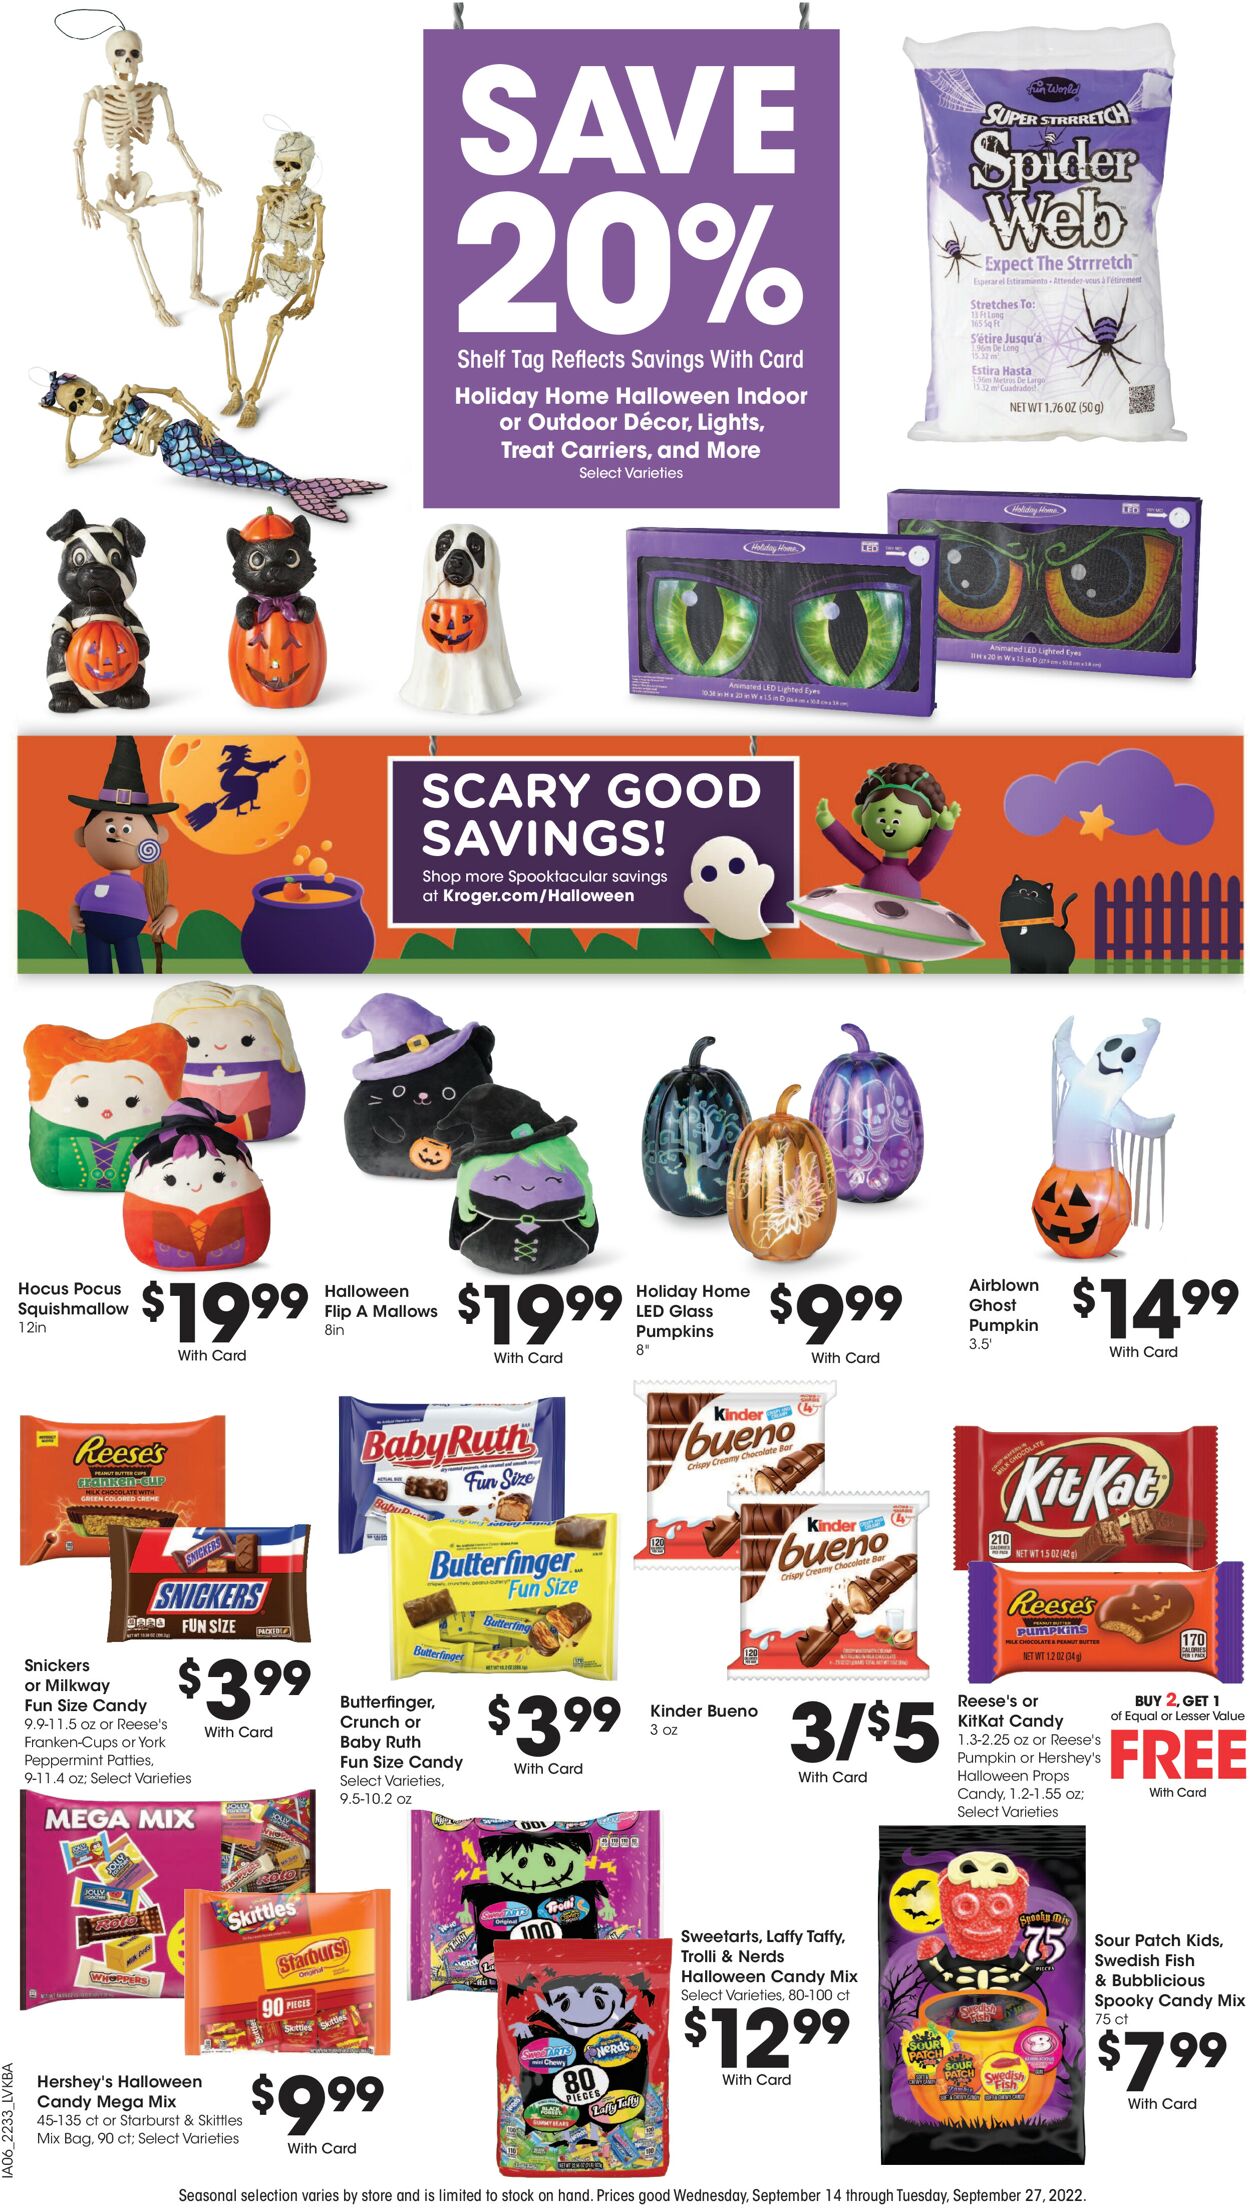 Catalogue Jay C Food Stores from 09/14/2022